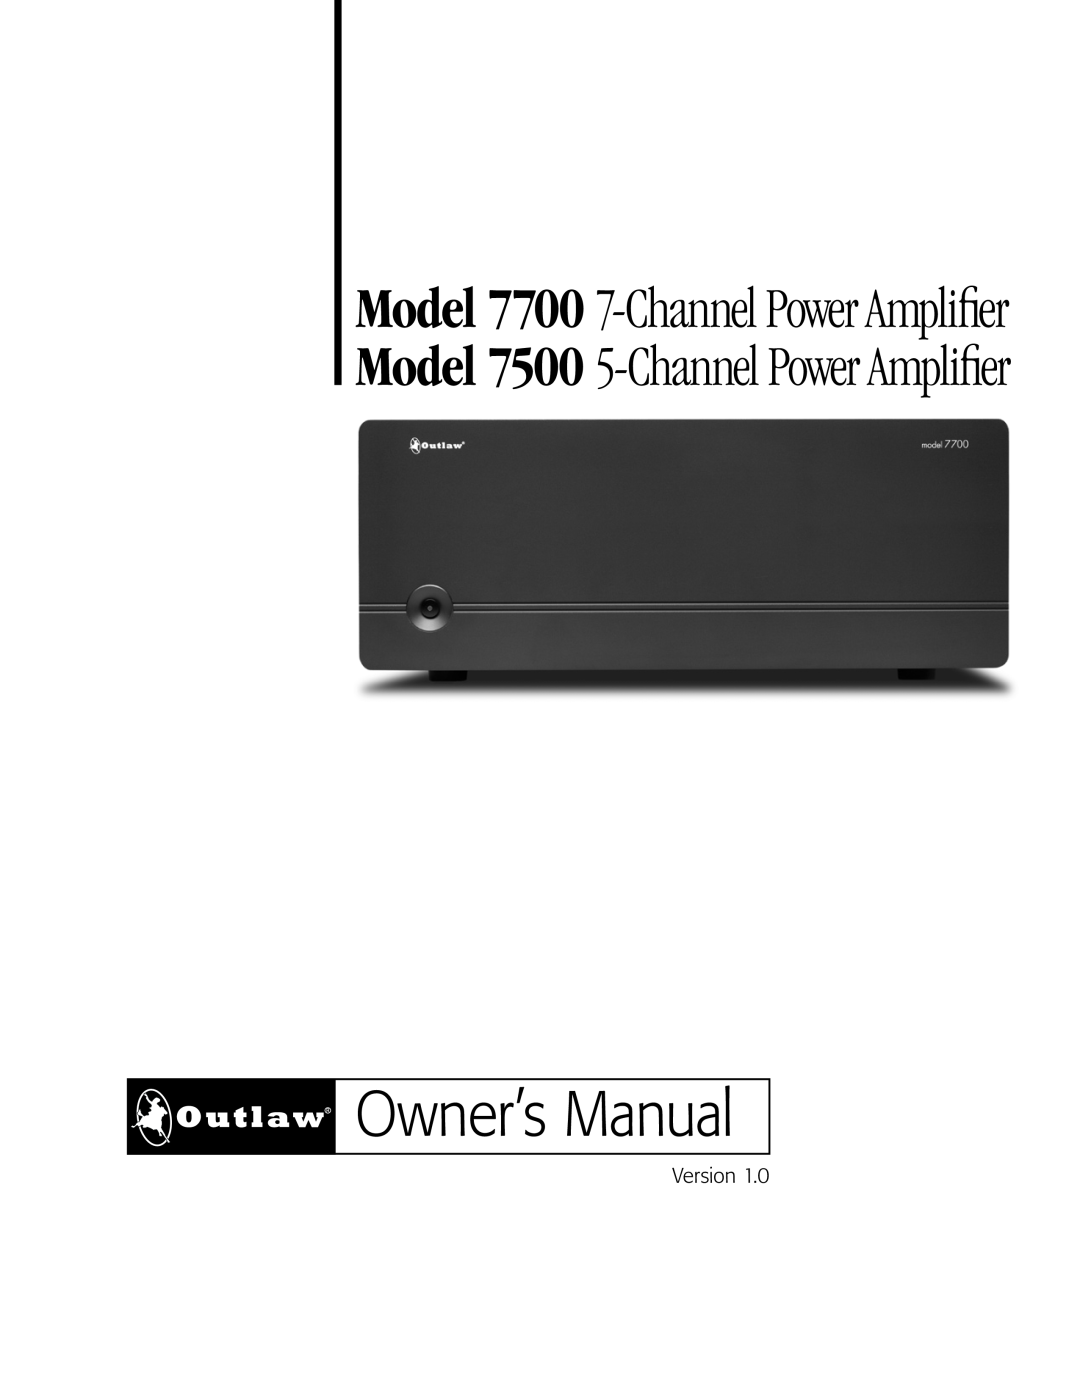 Outlaw Audio owner manual Owner’s Manual, Model 7500 5-ChannelPower Amplifier, Model 7700 7-ChannelPower Amplifier 